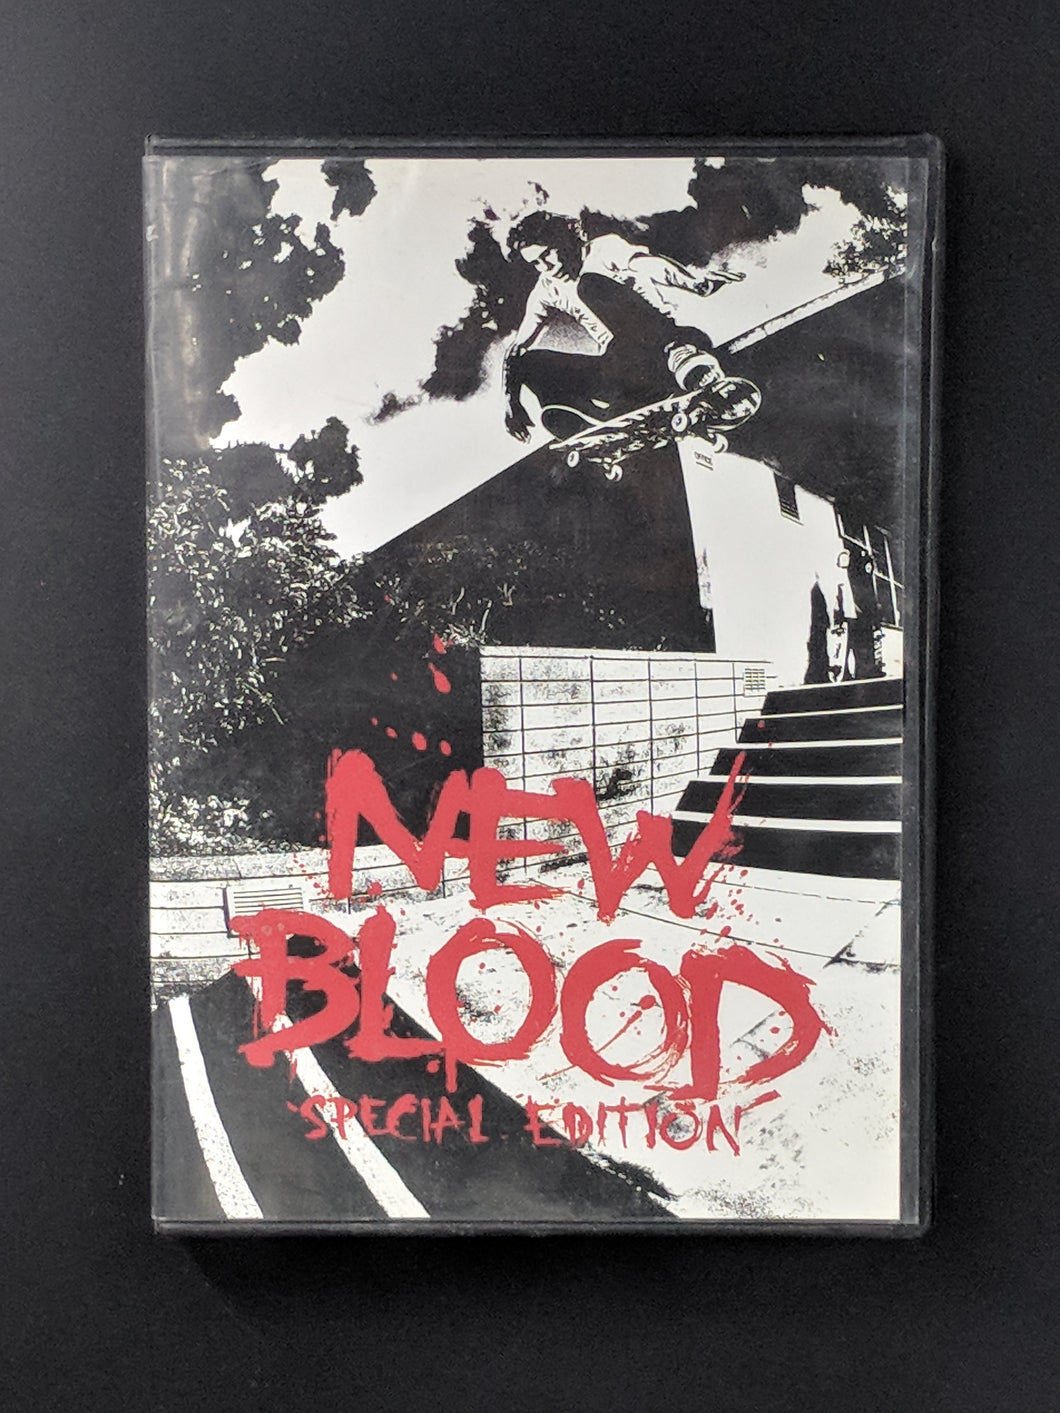 New Blood: Special Edition